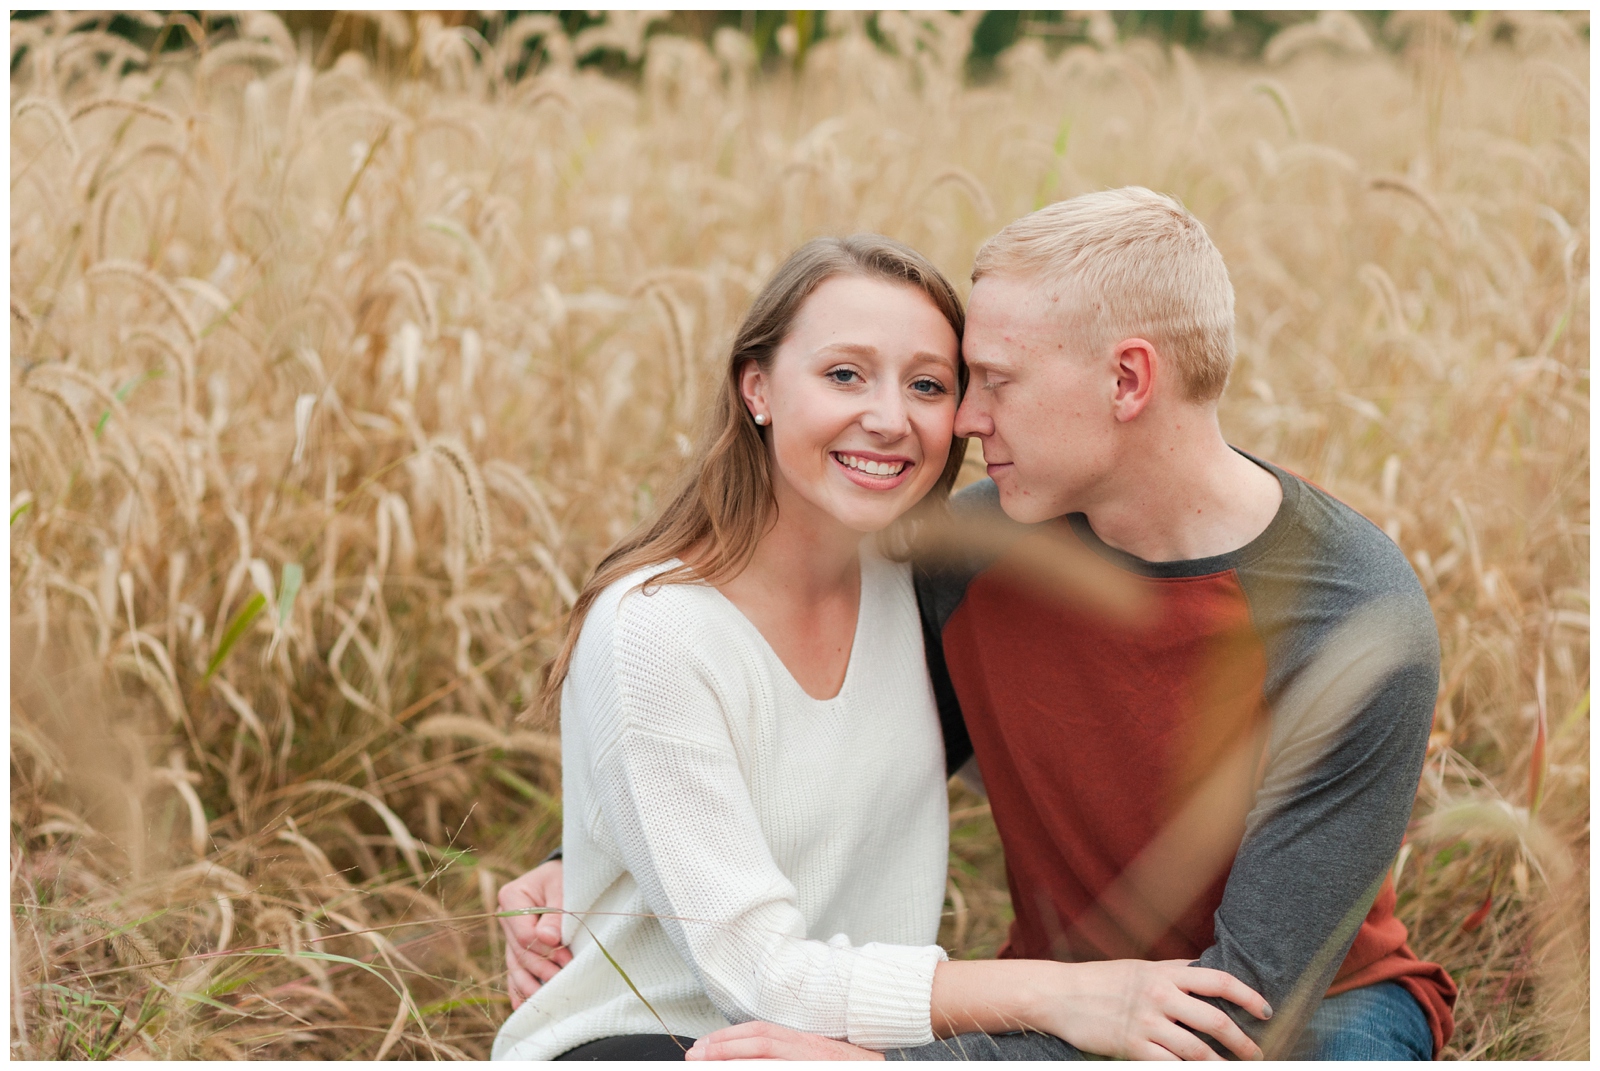 engaged couple romantically snuggled together in wheat field Country Engagement Session Sunbury Ohio